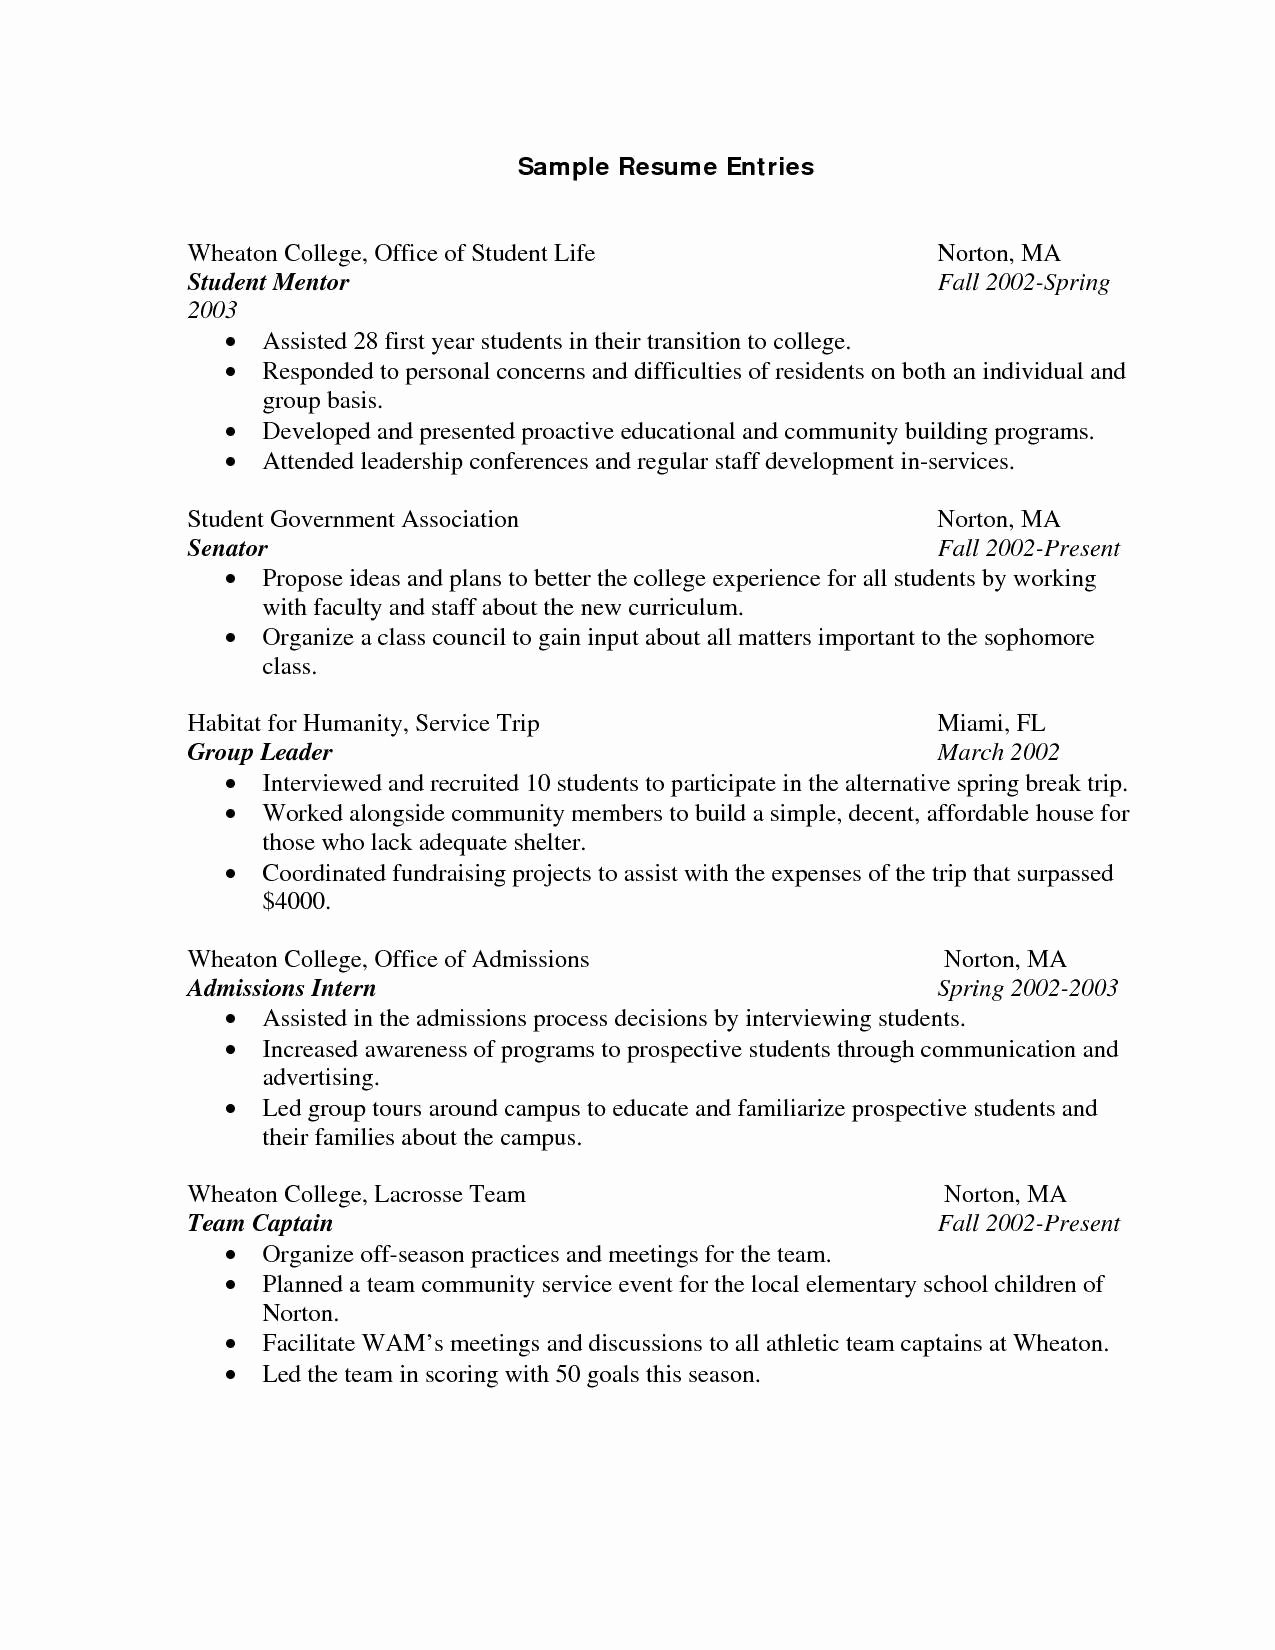 New Job Hopping Resume Example – St Resume and